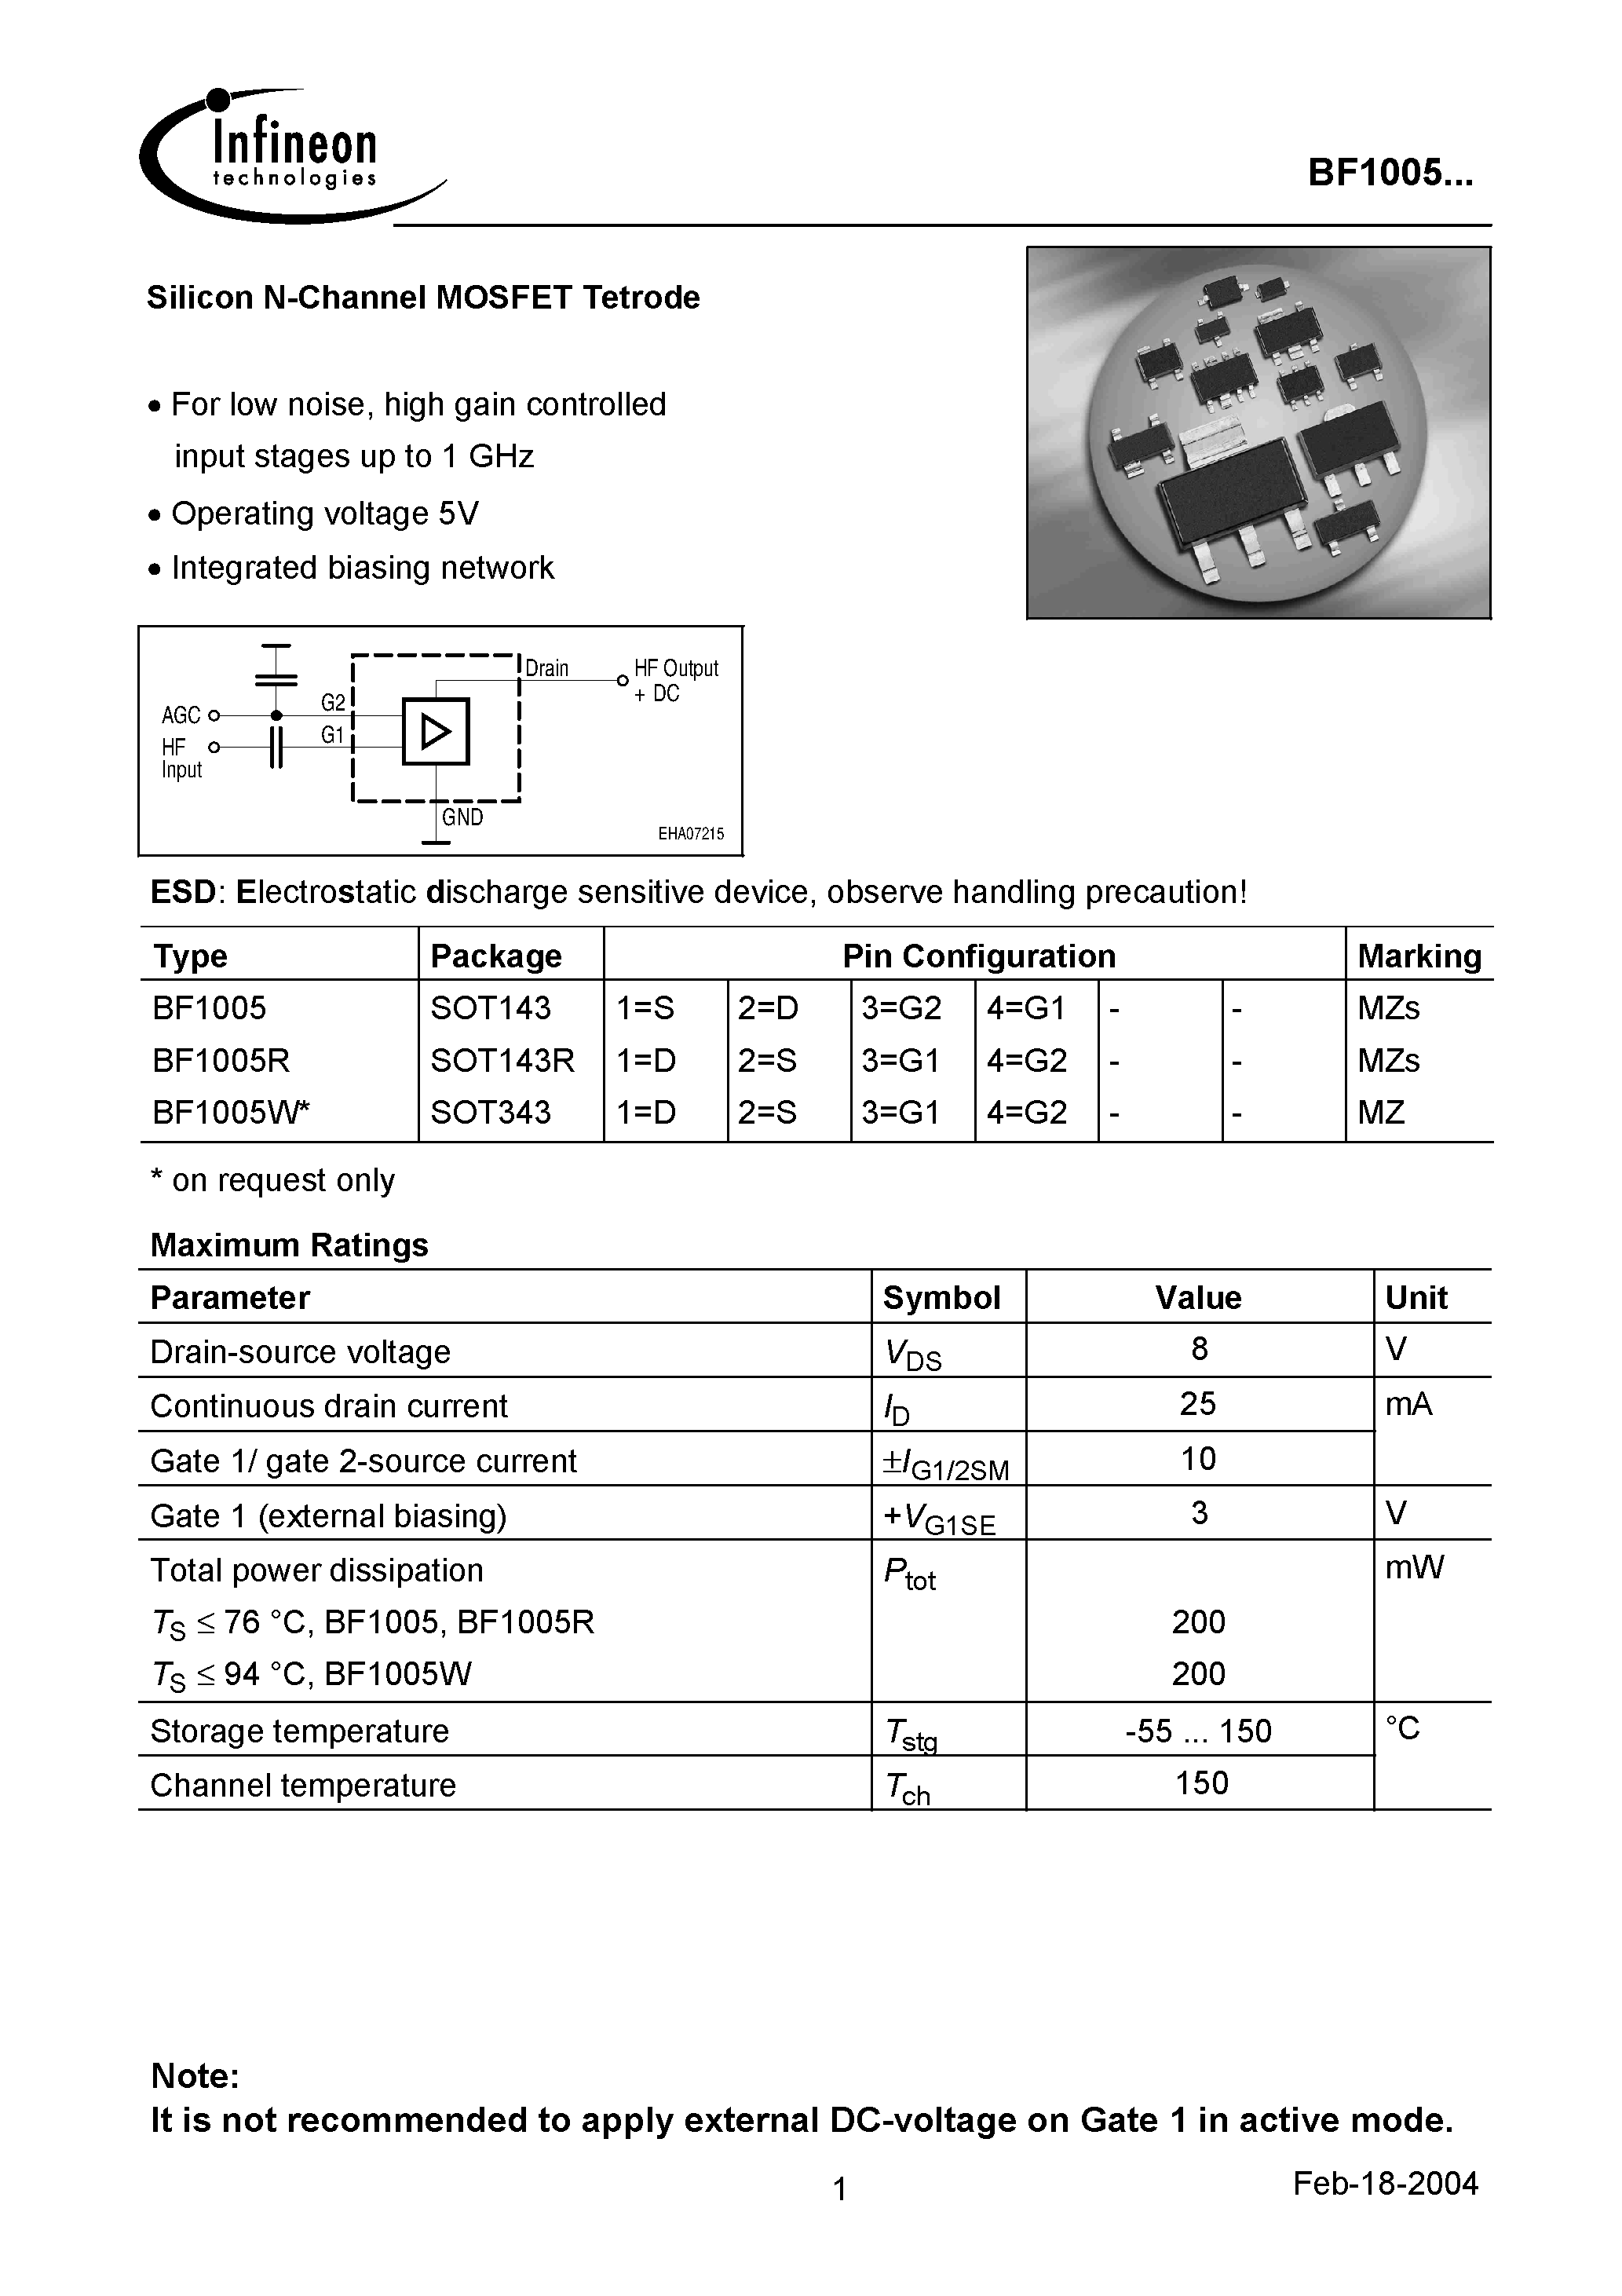 Datasheet BF1005R - Silicon N-Channel MOSFET Tetrode page 1